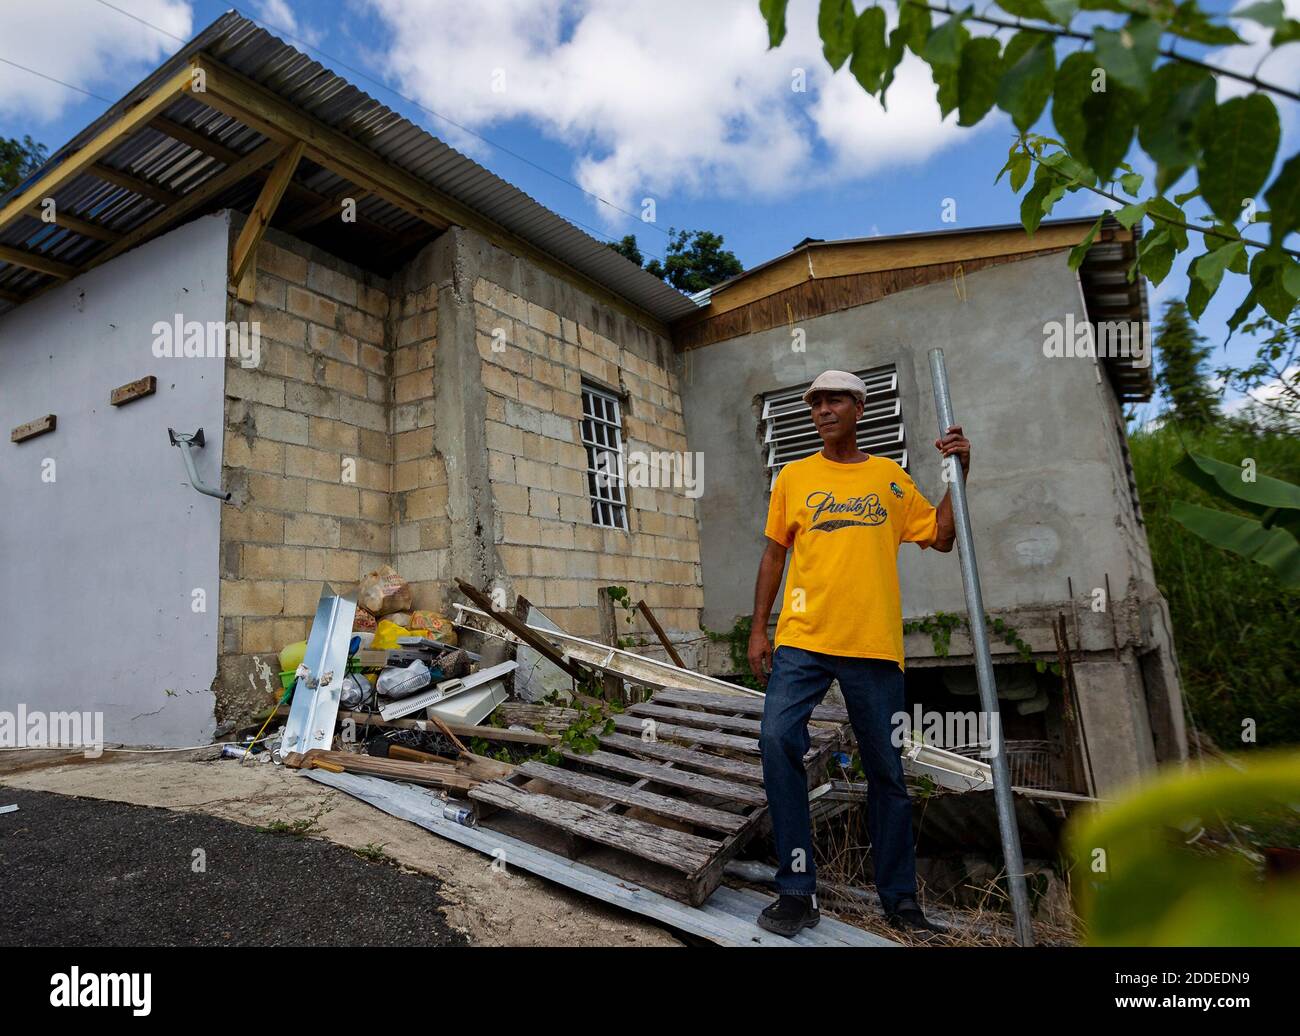 NO FILM, NO VIDEO, NO TV, NO DOCUMENTARY - Fernando Rivera Molina, 60, stands outside his partially repaired home in the La Juncia community in Comerio, Puerto Rico on August 25, 2018. Volunteers helped Rivera Molina put on a new roof after he was twice denied federal aid because he lacked a deed to his property after Hurricane Maria. Photo by Matias J. Ocner/Miami Herald/TNS/ABACAPRESS.COM Stock Photo